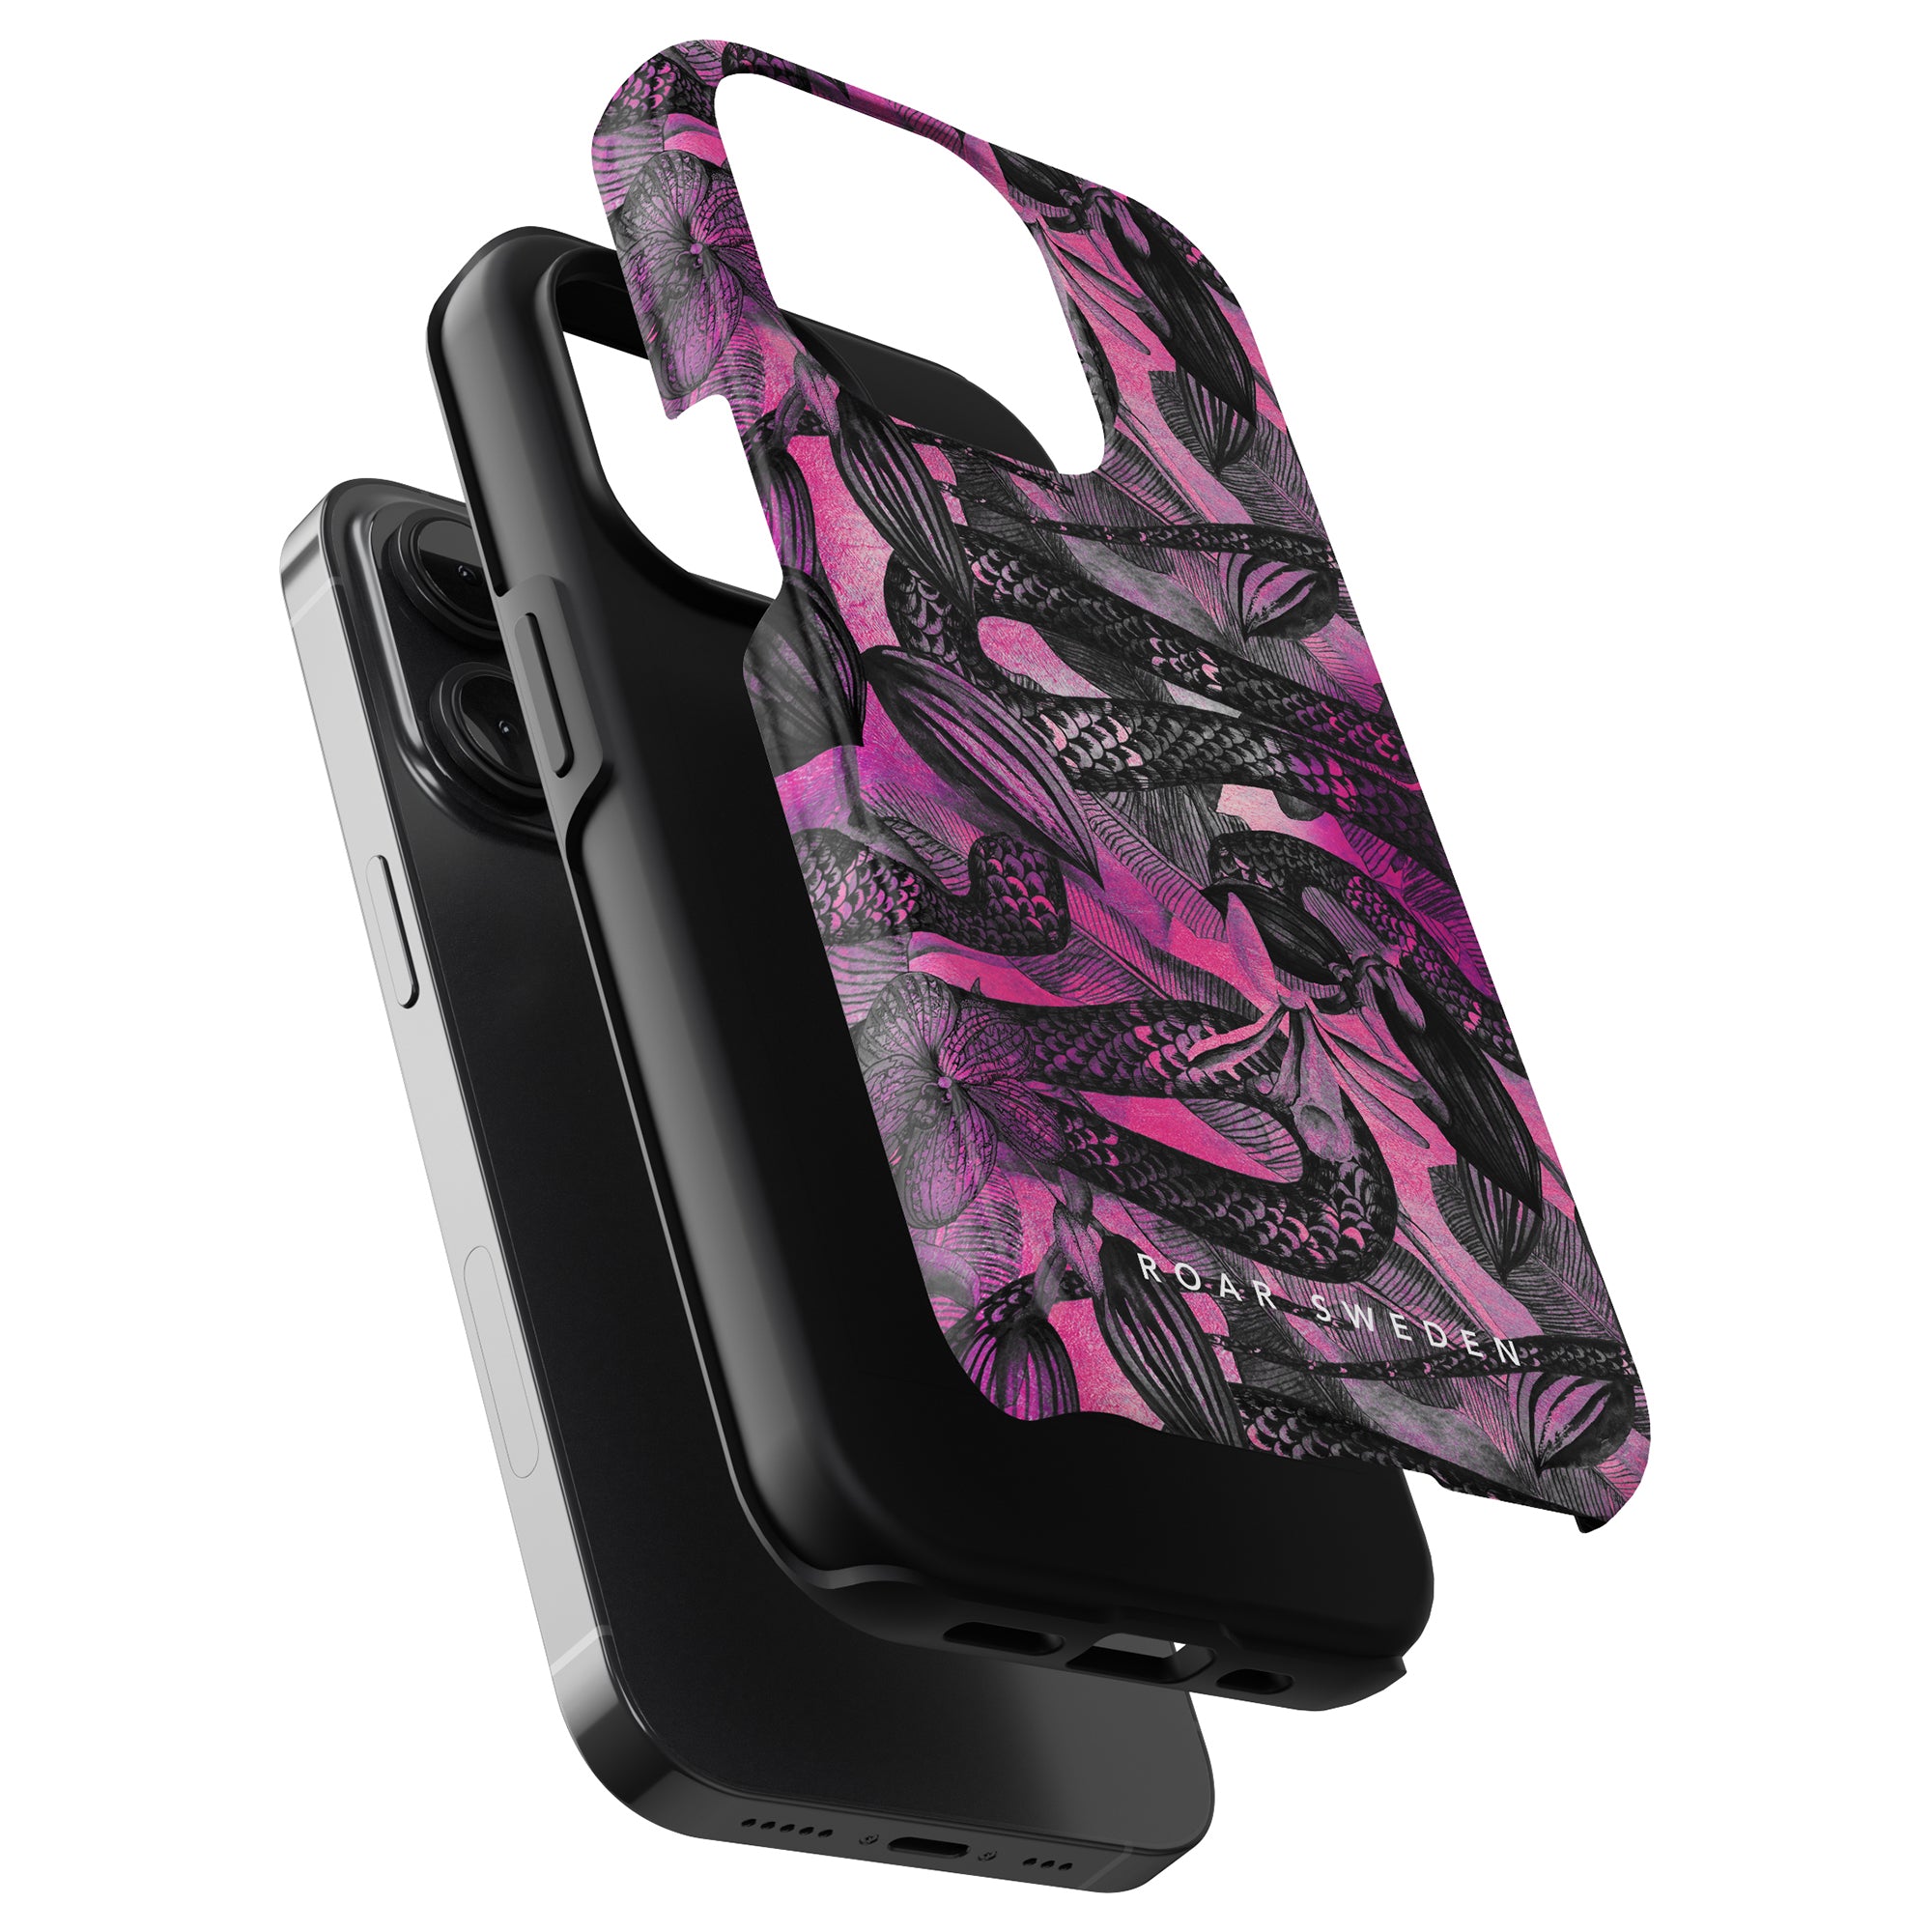 A vibrant pink and mesmerizing purple Snake Nest - Tough Case designed specifically for the stylish and sophisticated iPhone 11 Pro.